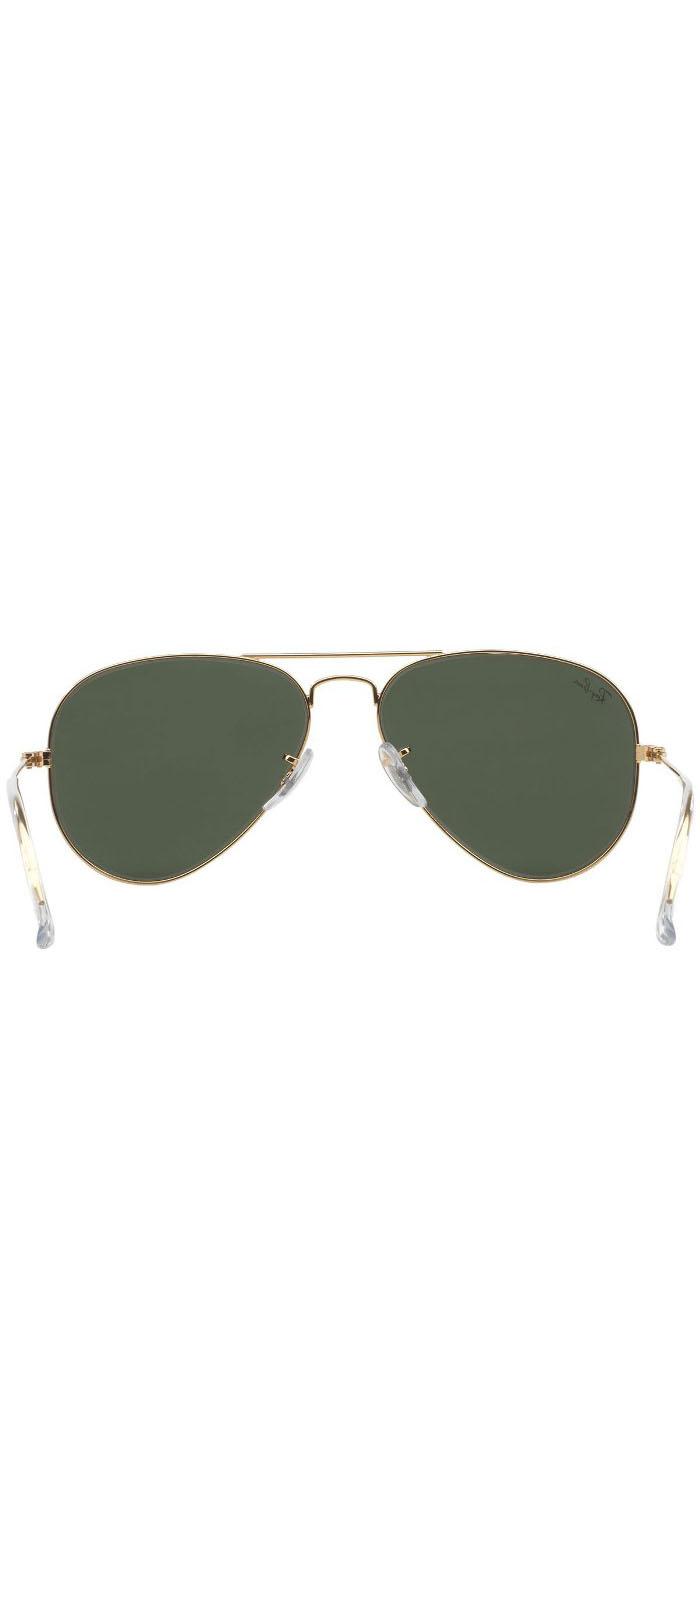 Ray-Ban Sunglasses - RB3025-W3234-55 - LifeStyle Collection